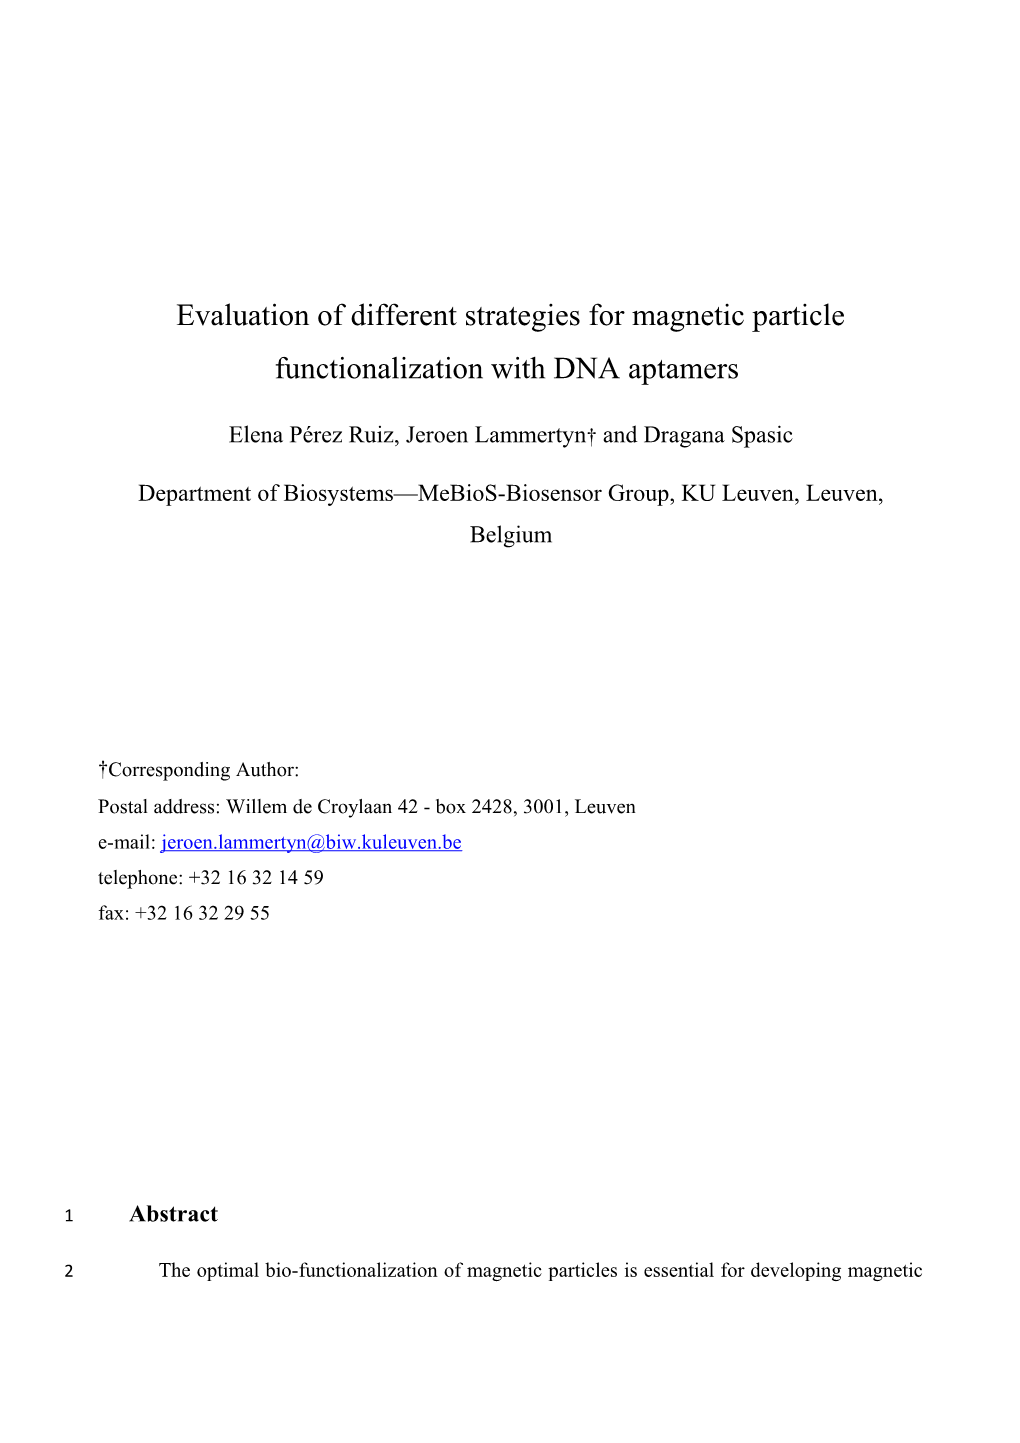 Evaluation of Different Strategies for Magnetic Particle Functionalization with DNA Aptamers